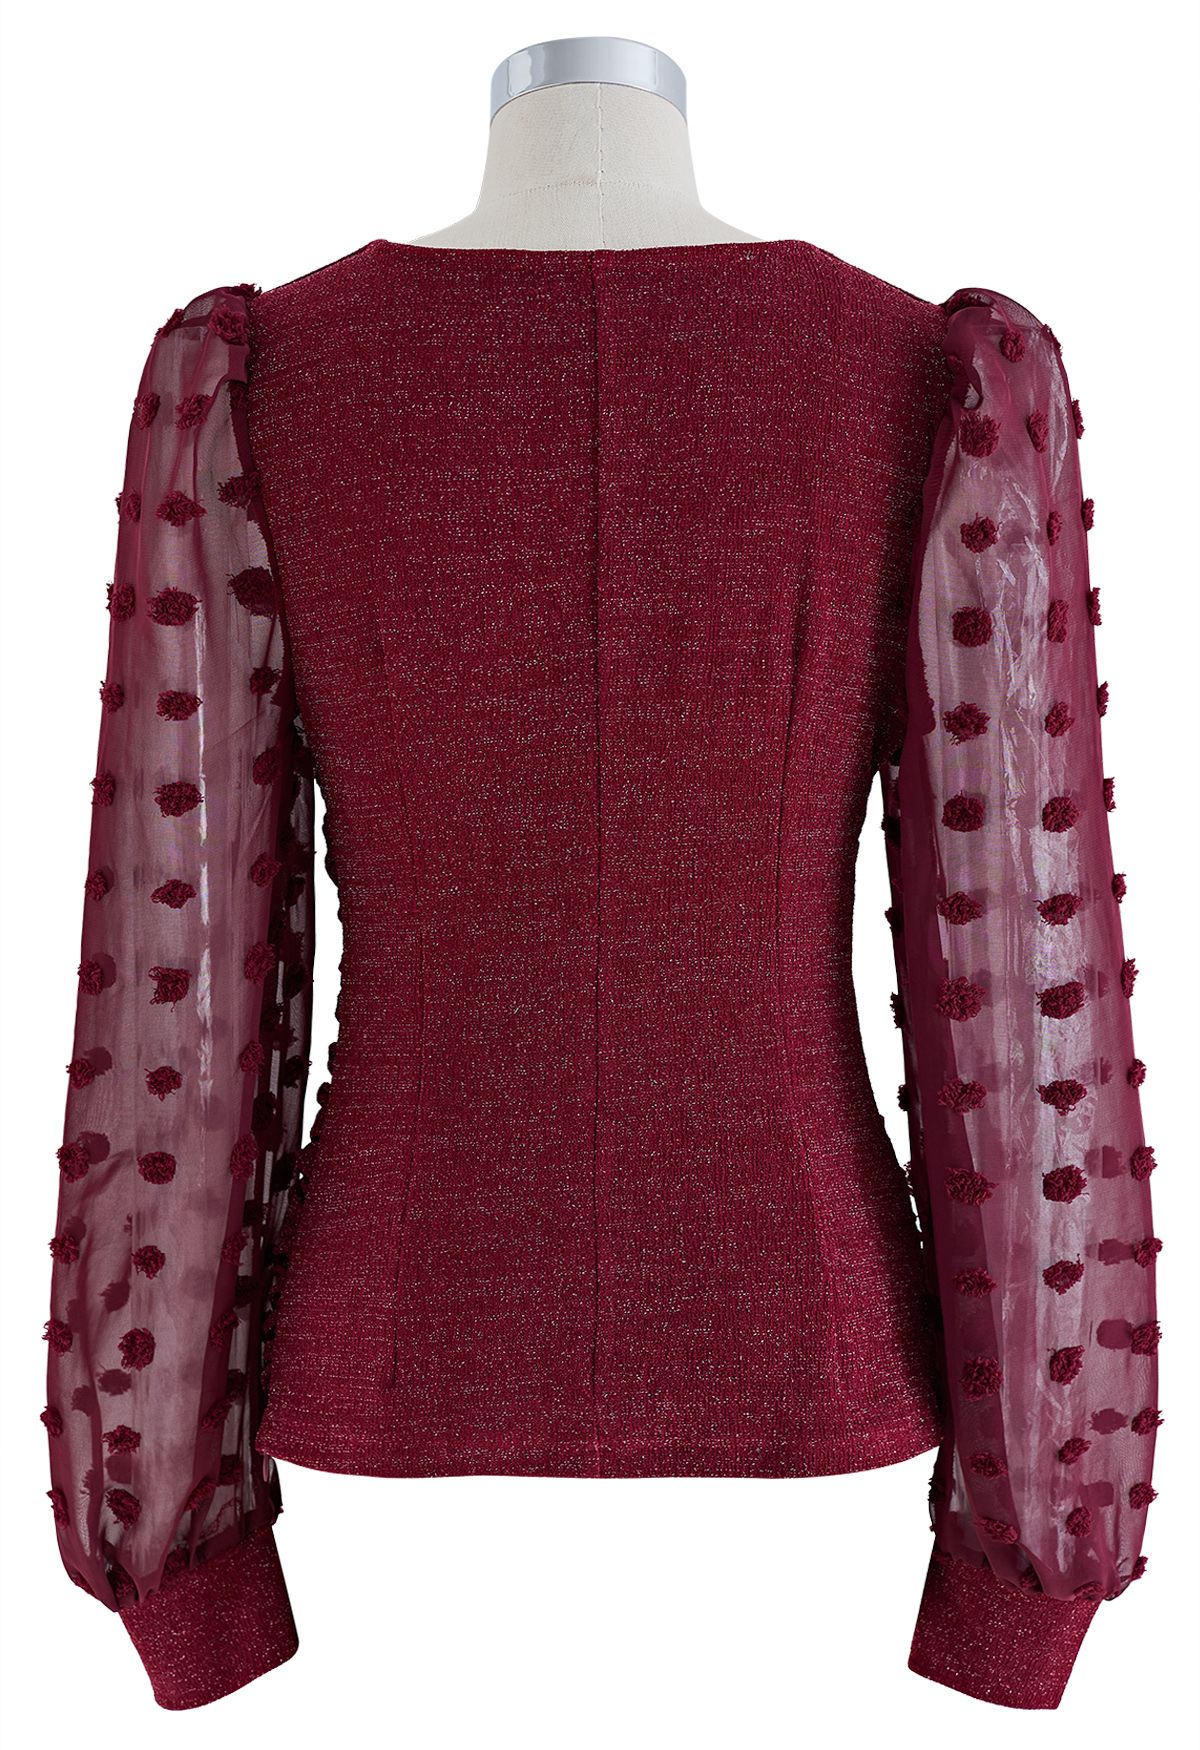 Sweetheart Neck Ruched Spliced Shimmer Top in Burgundy